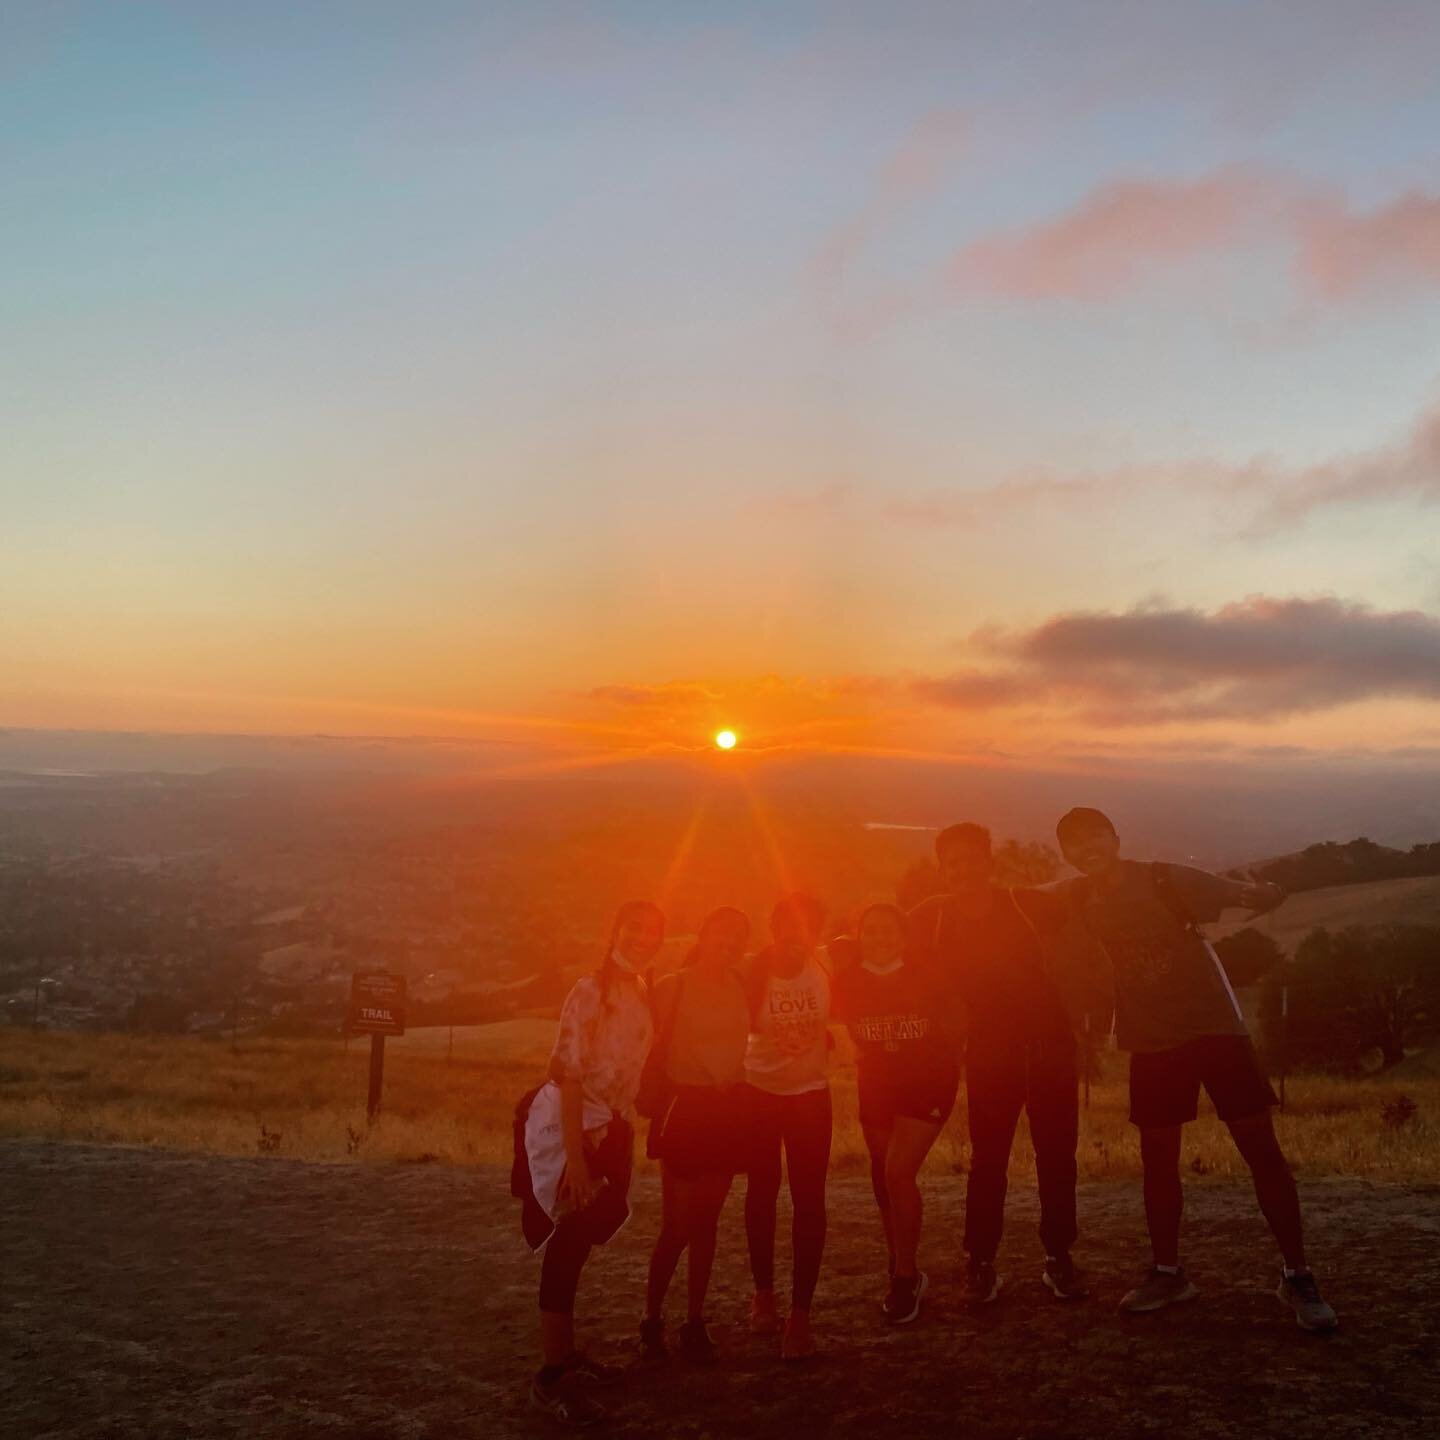 best hike ever with the outdoors club fam🌄❤️ join us next time !!!